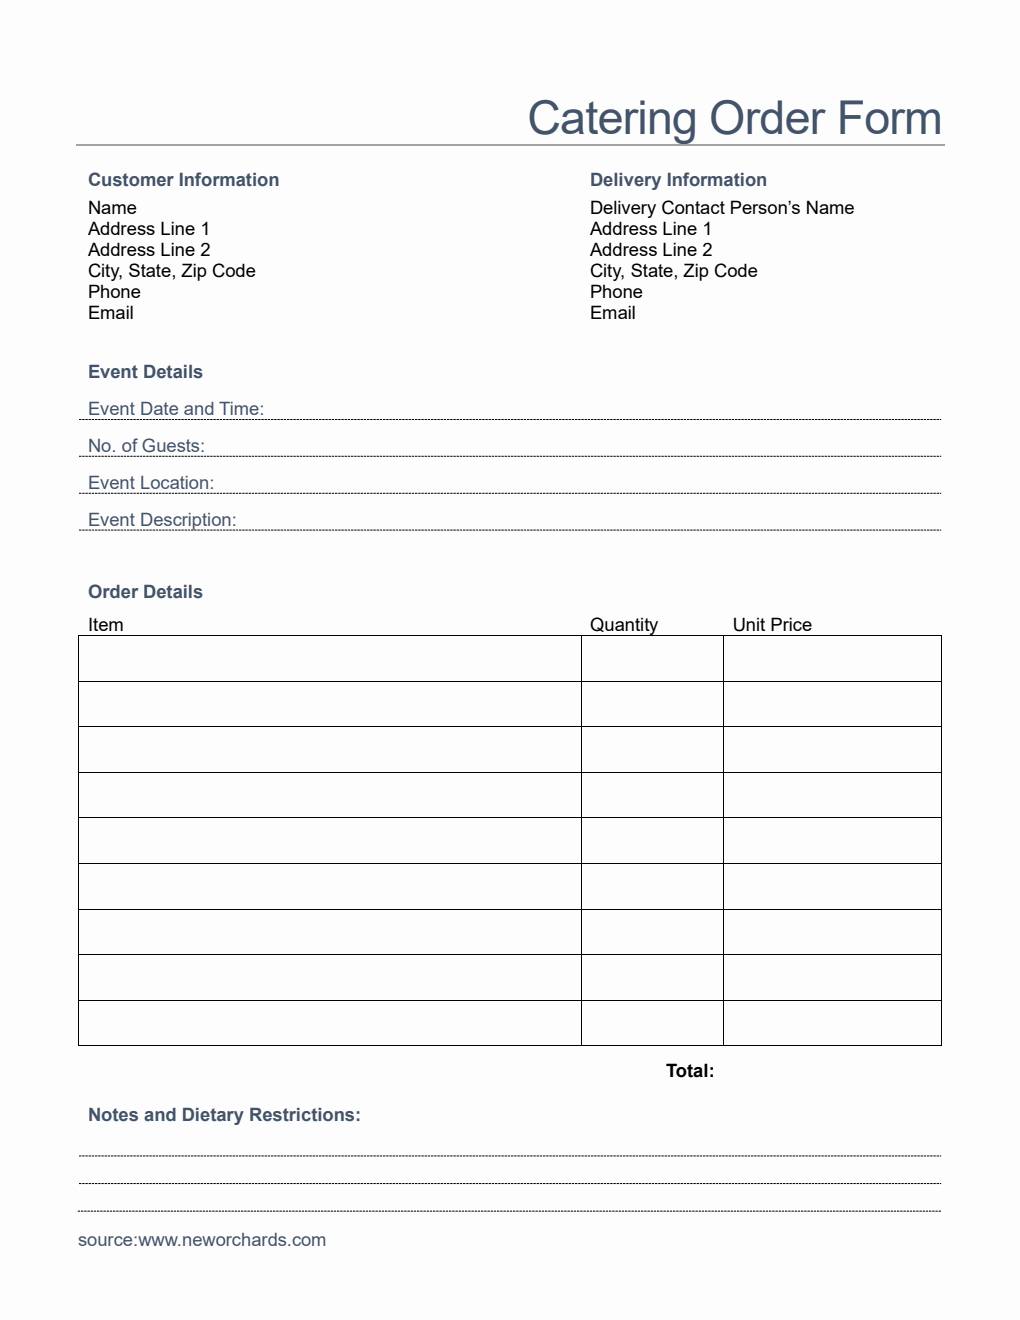 Blank Catering Order Form Template in Word